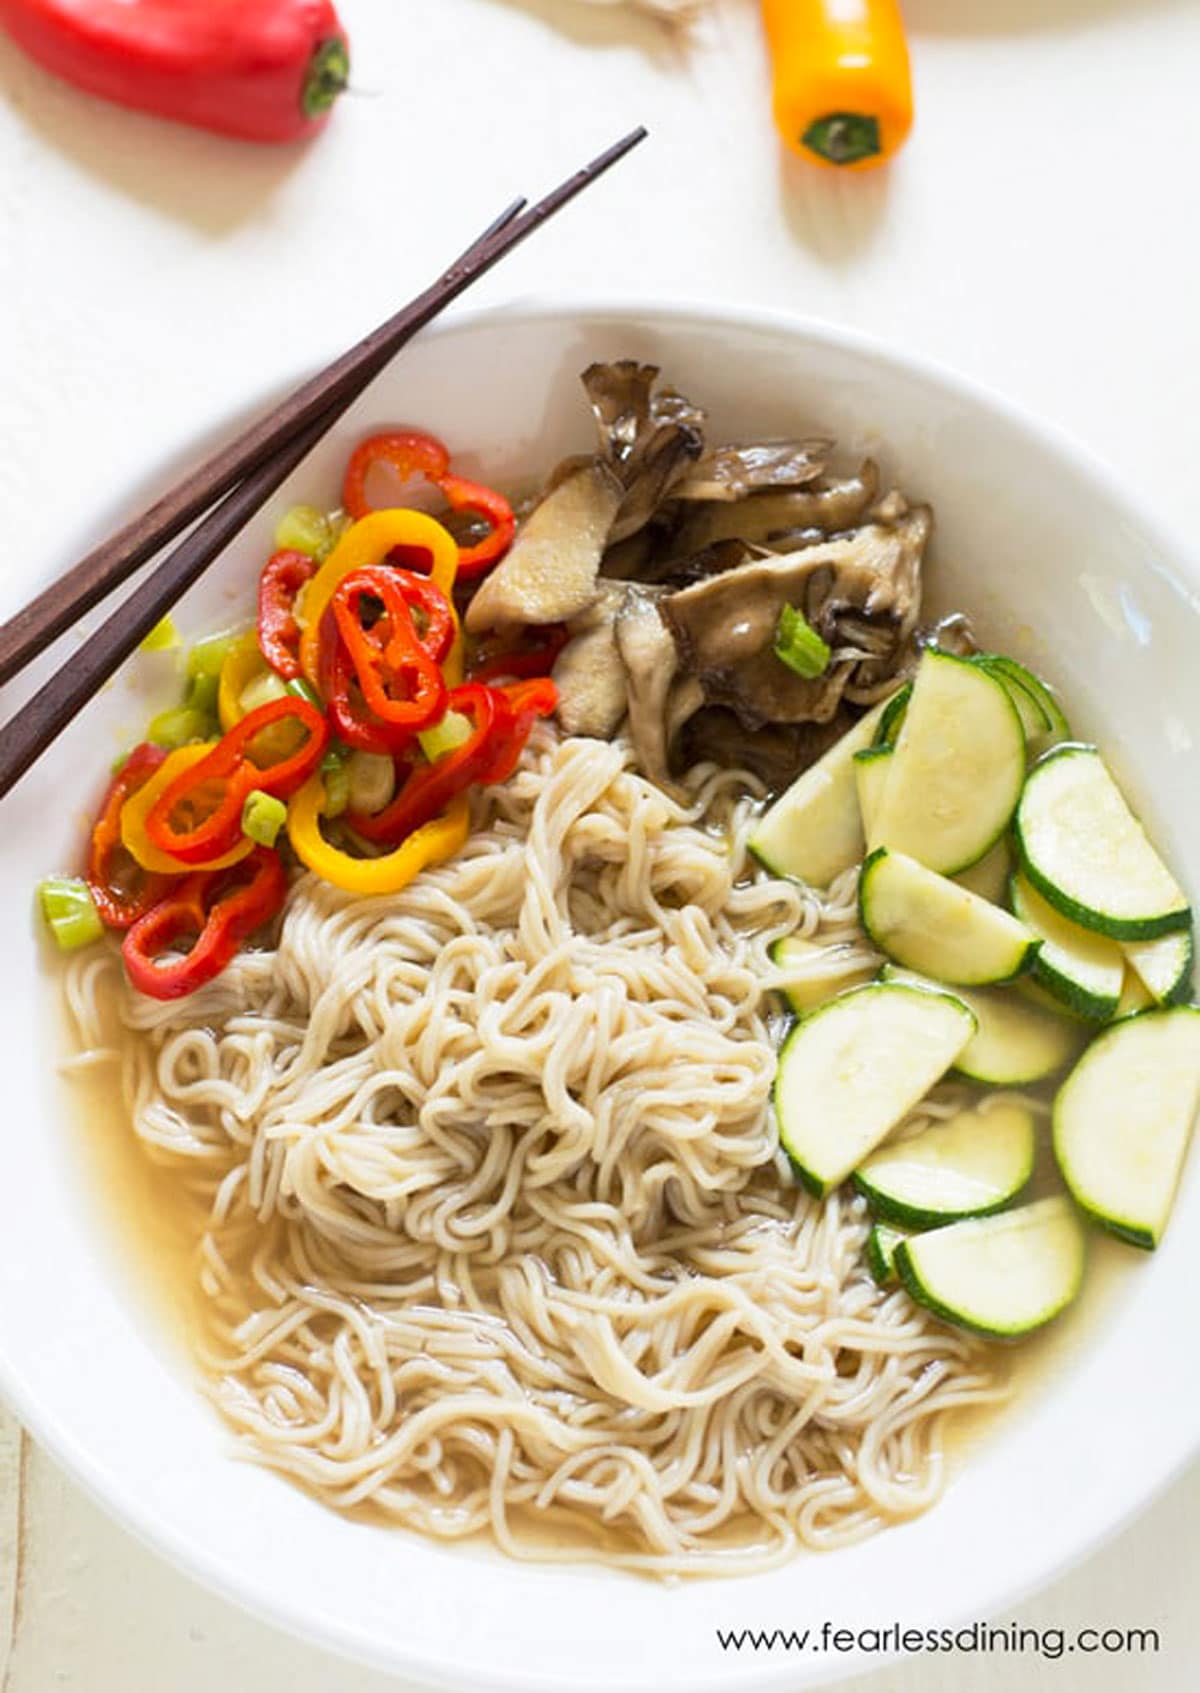 A bowl of ramen soup with vegetables.